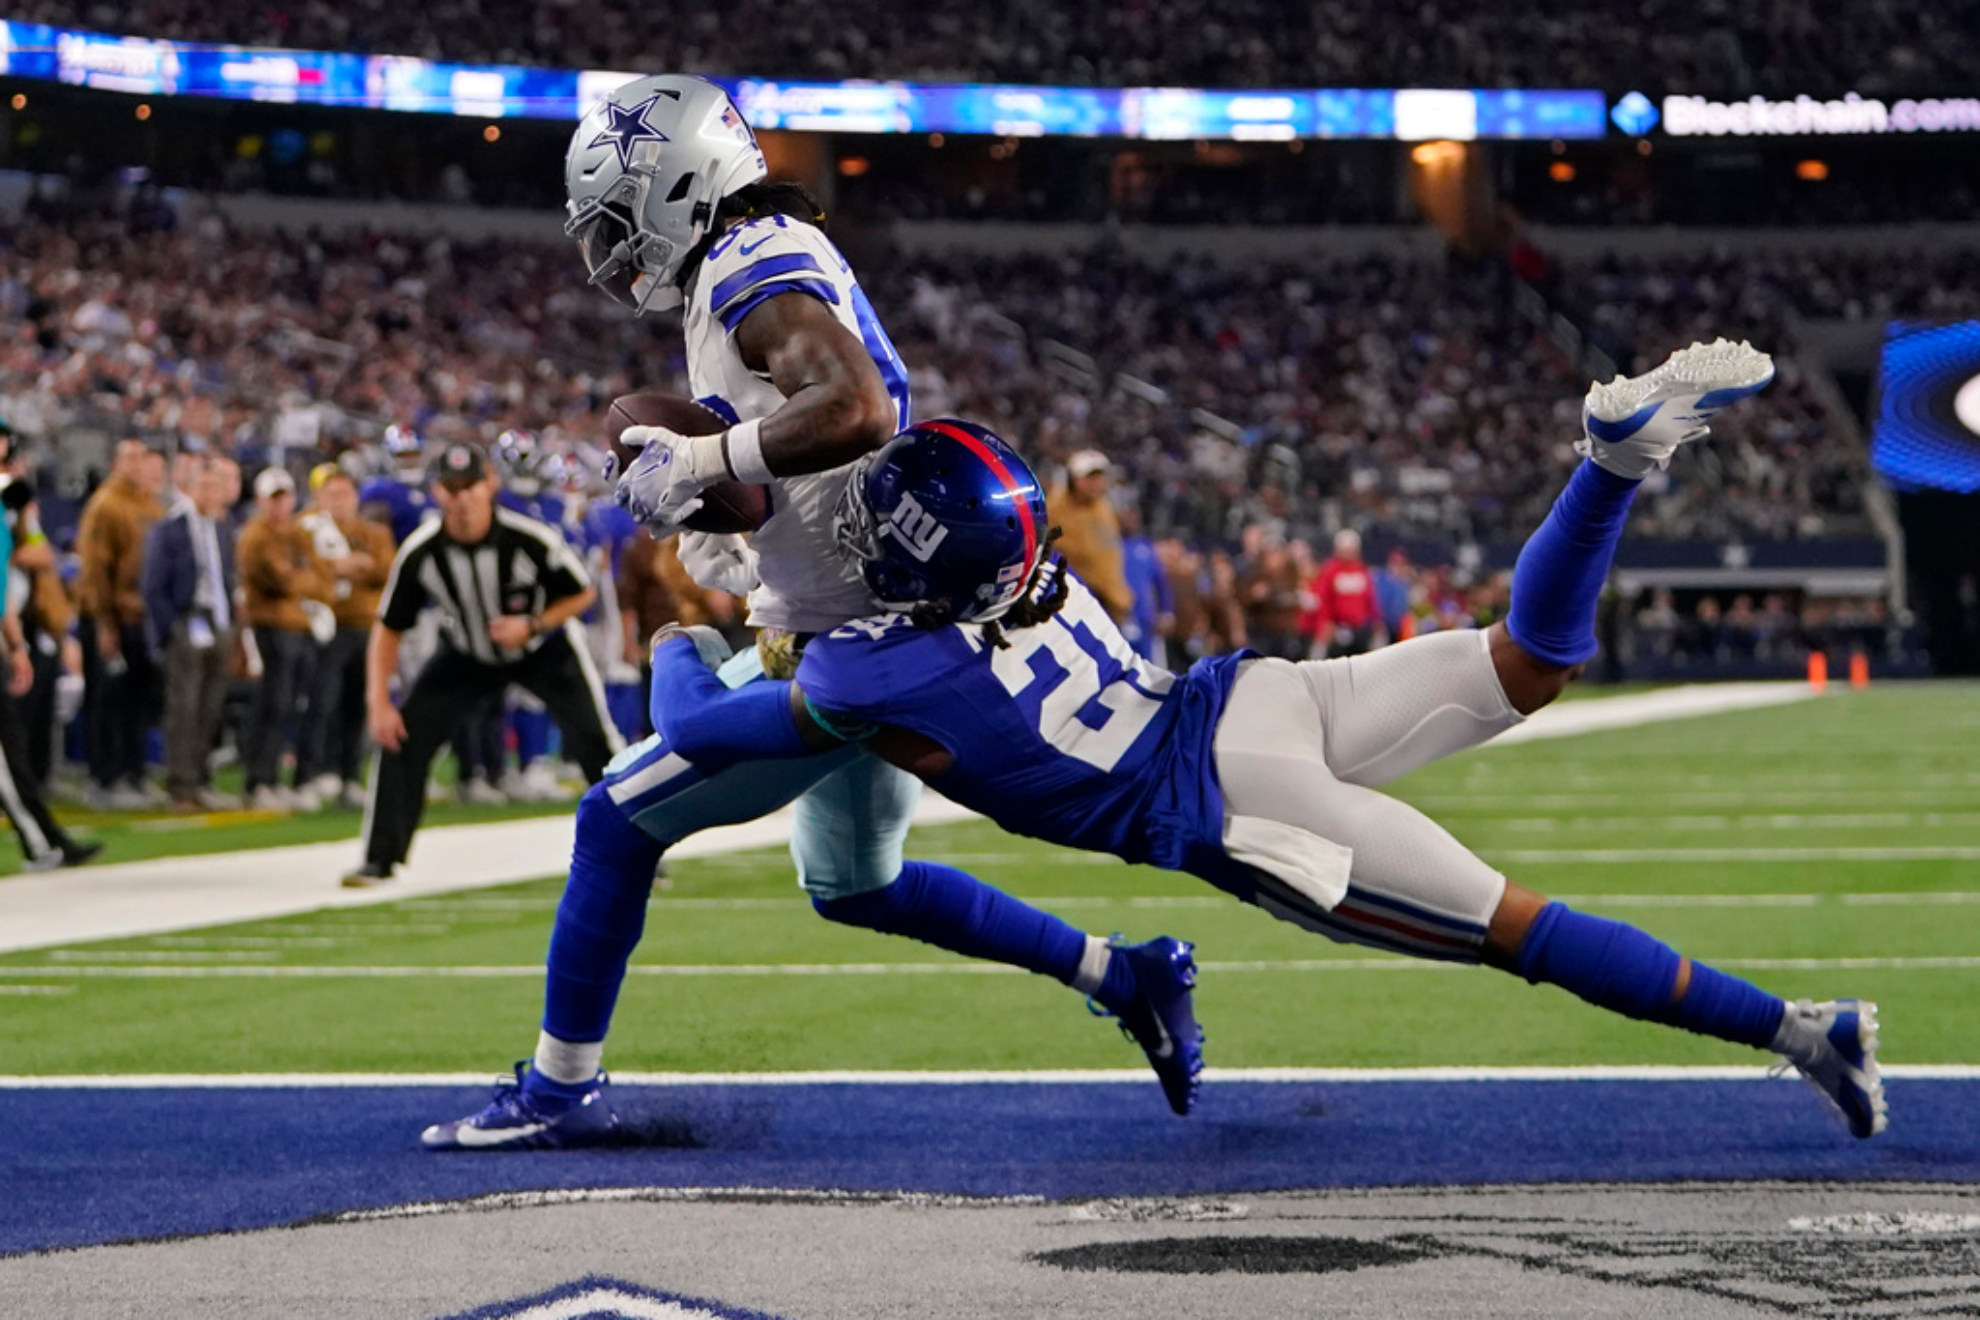 Dallas Cowboys dominate the New York Giants at home earning their 6th straight victory